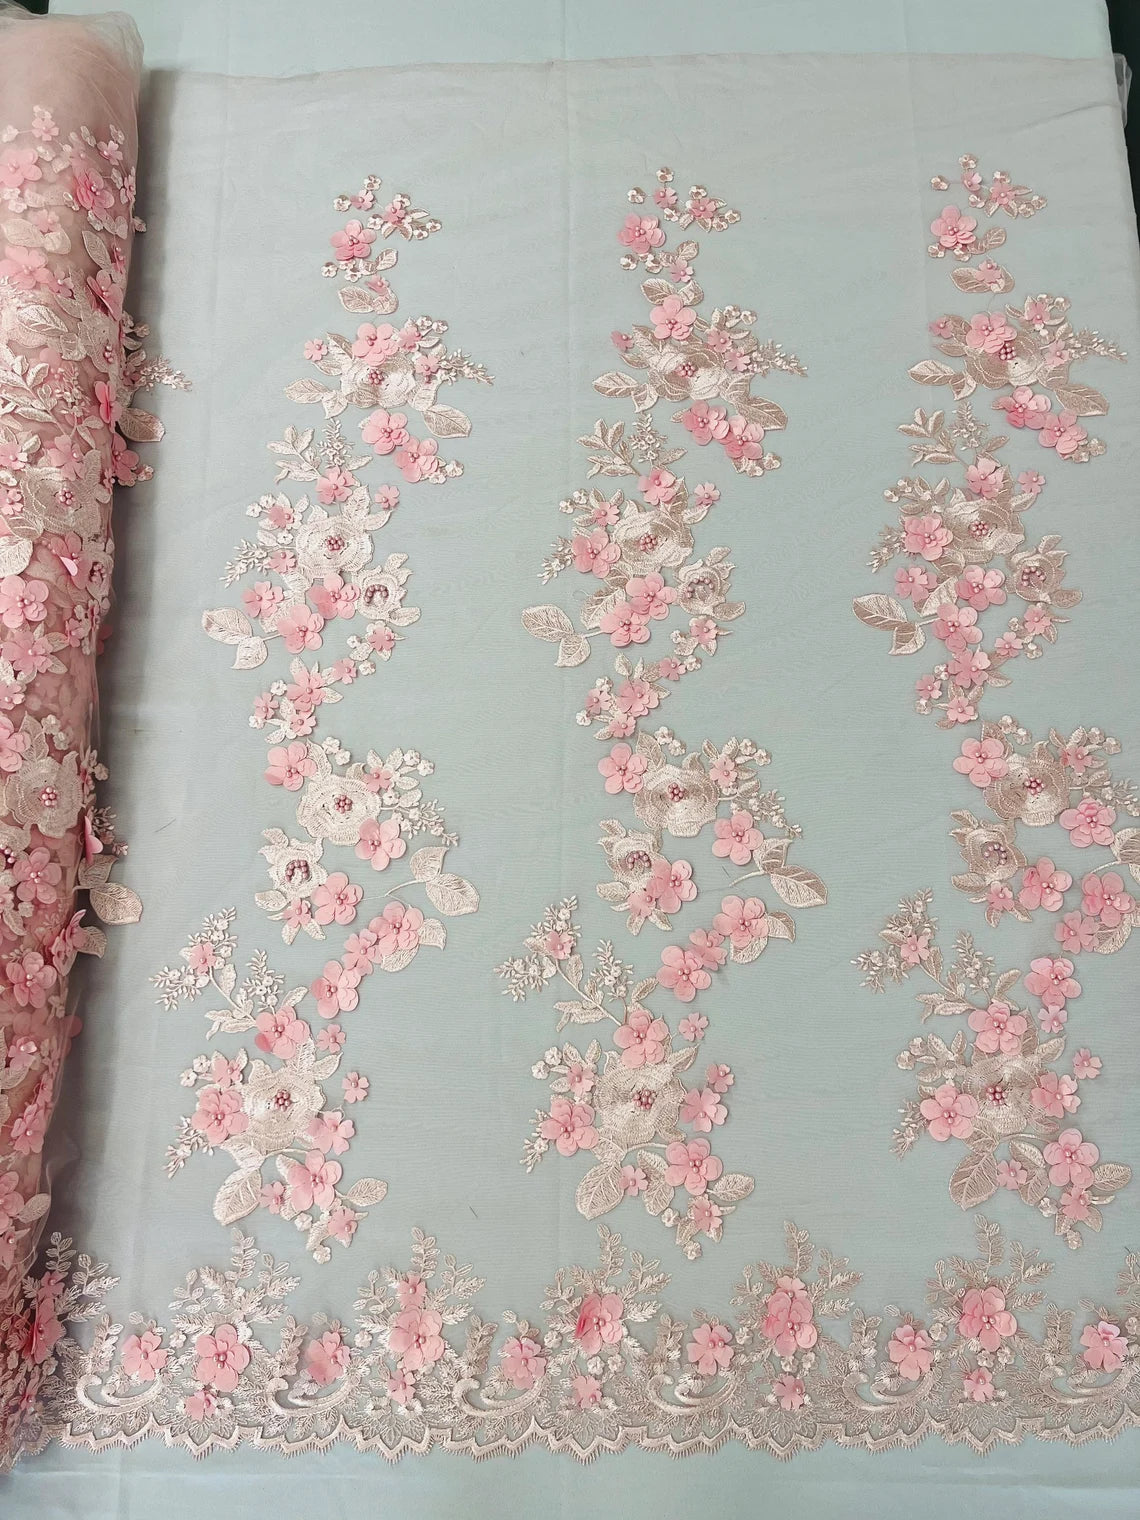 3D Flower Panels Fabric - Blush Pink - Flower Panels Bead Embroidered on Lace Fabric Sold By Yard